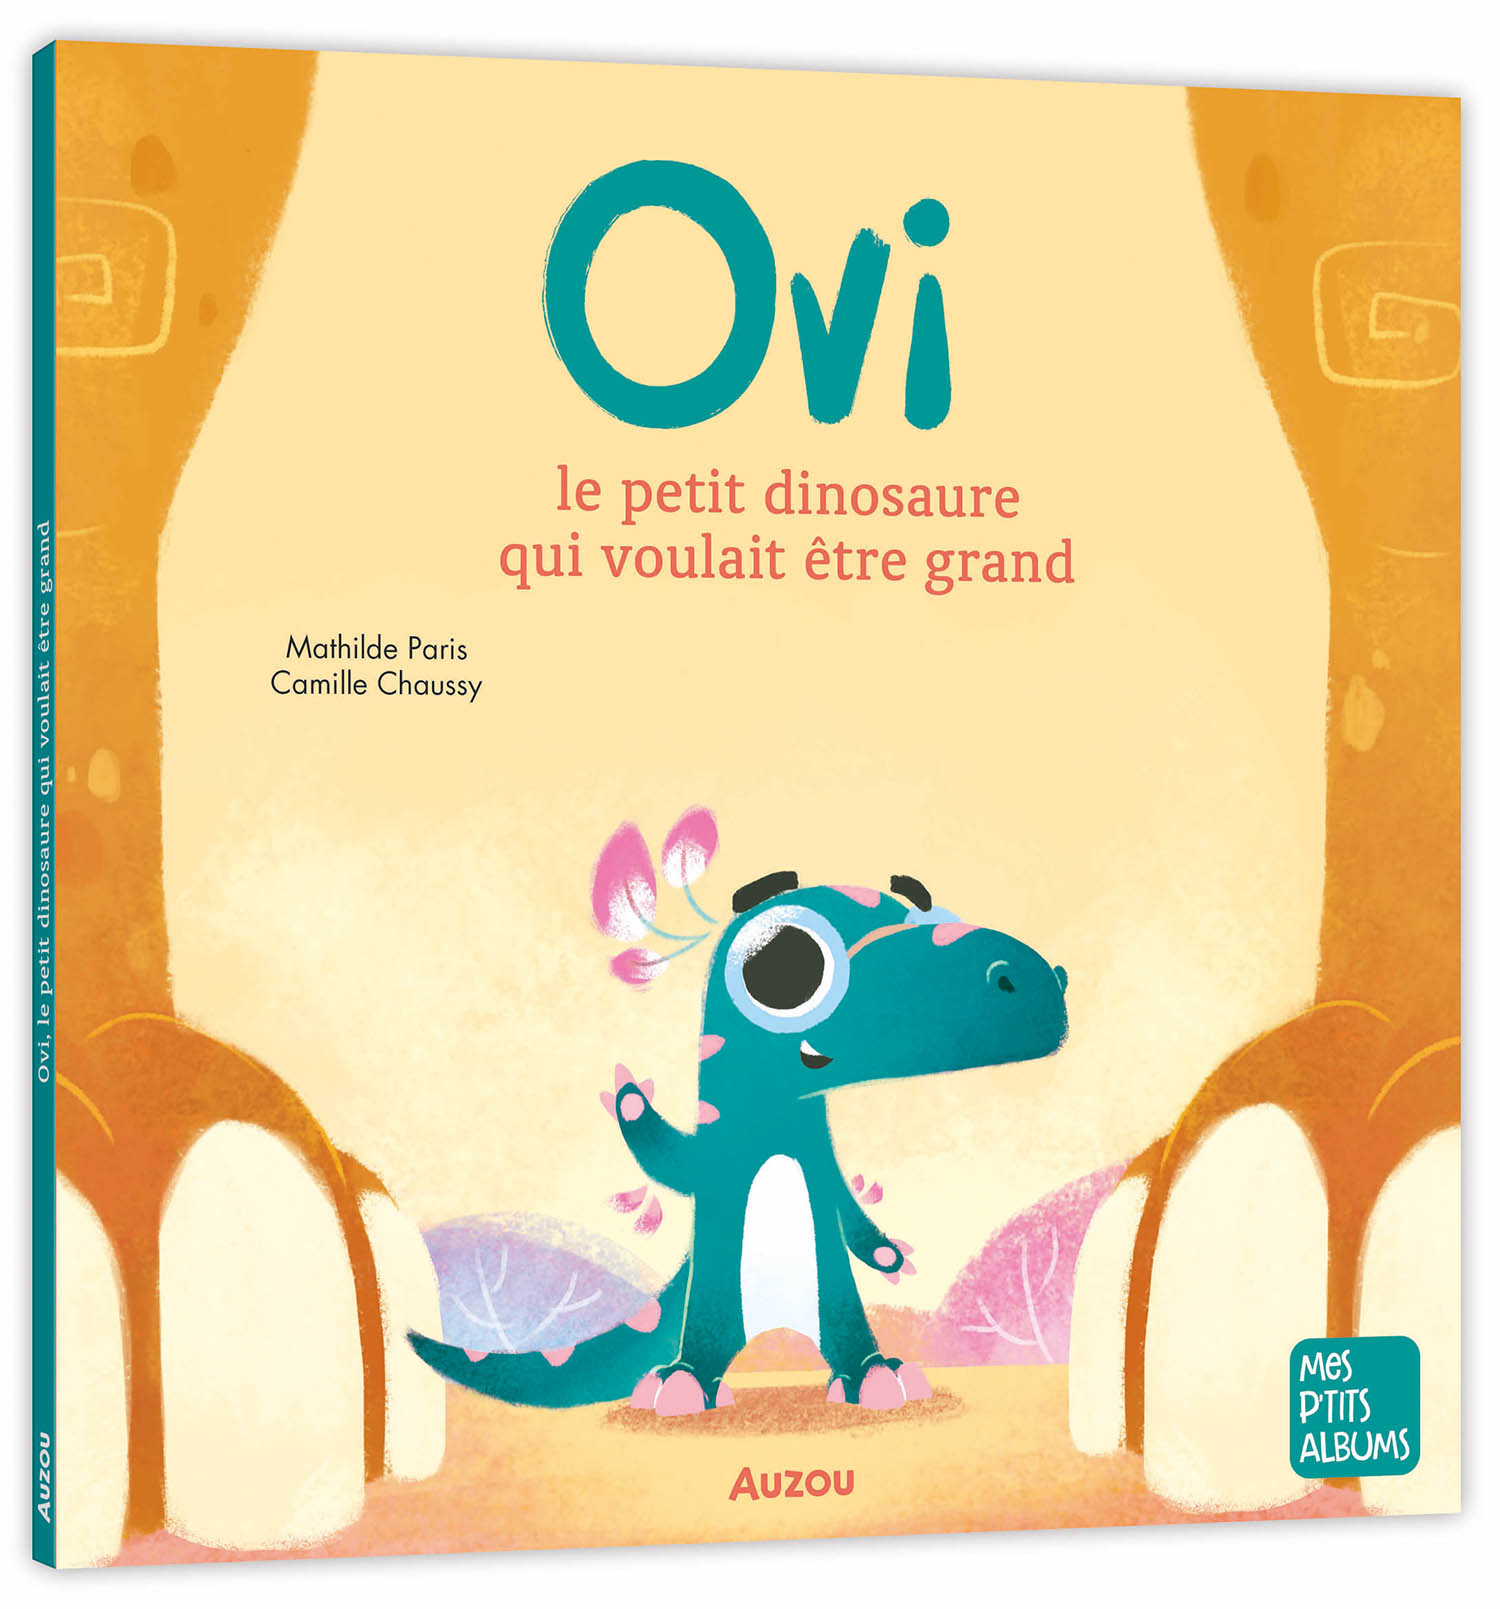 Ovi, The Small Dinosaur Who Wanted To Be Bigger